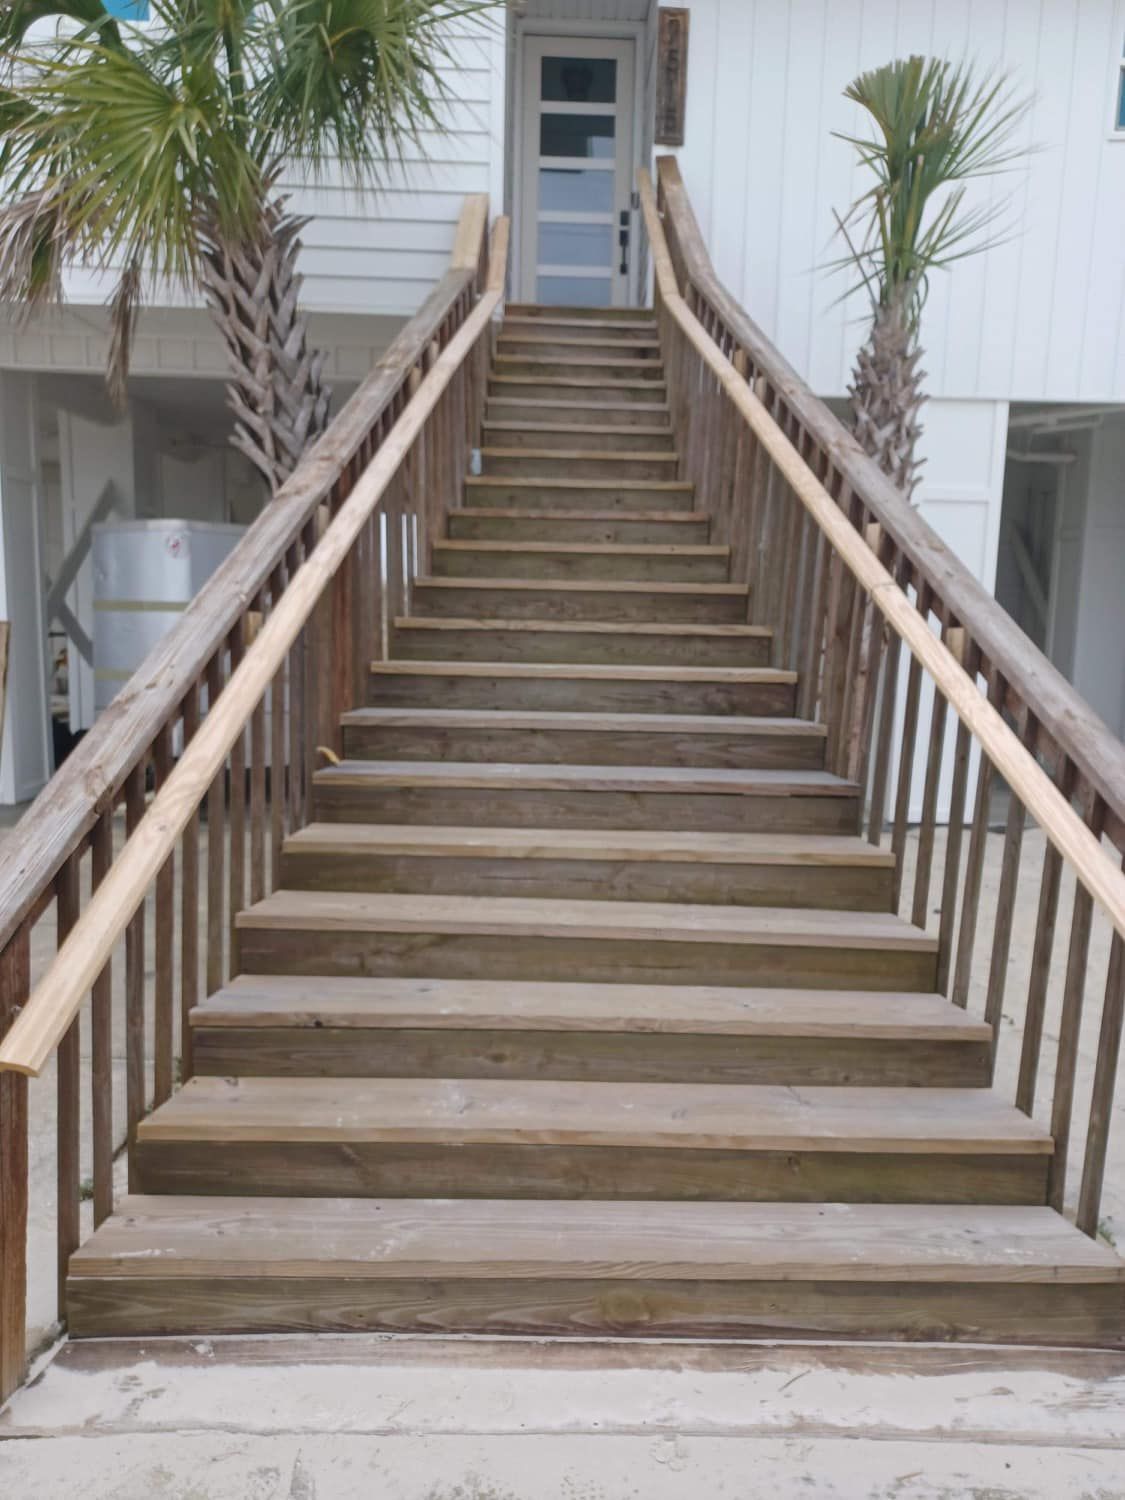 Before Fixing The Stairs - Fort Walton Beach, FL - Swear Fence & Lawn Installations LLC